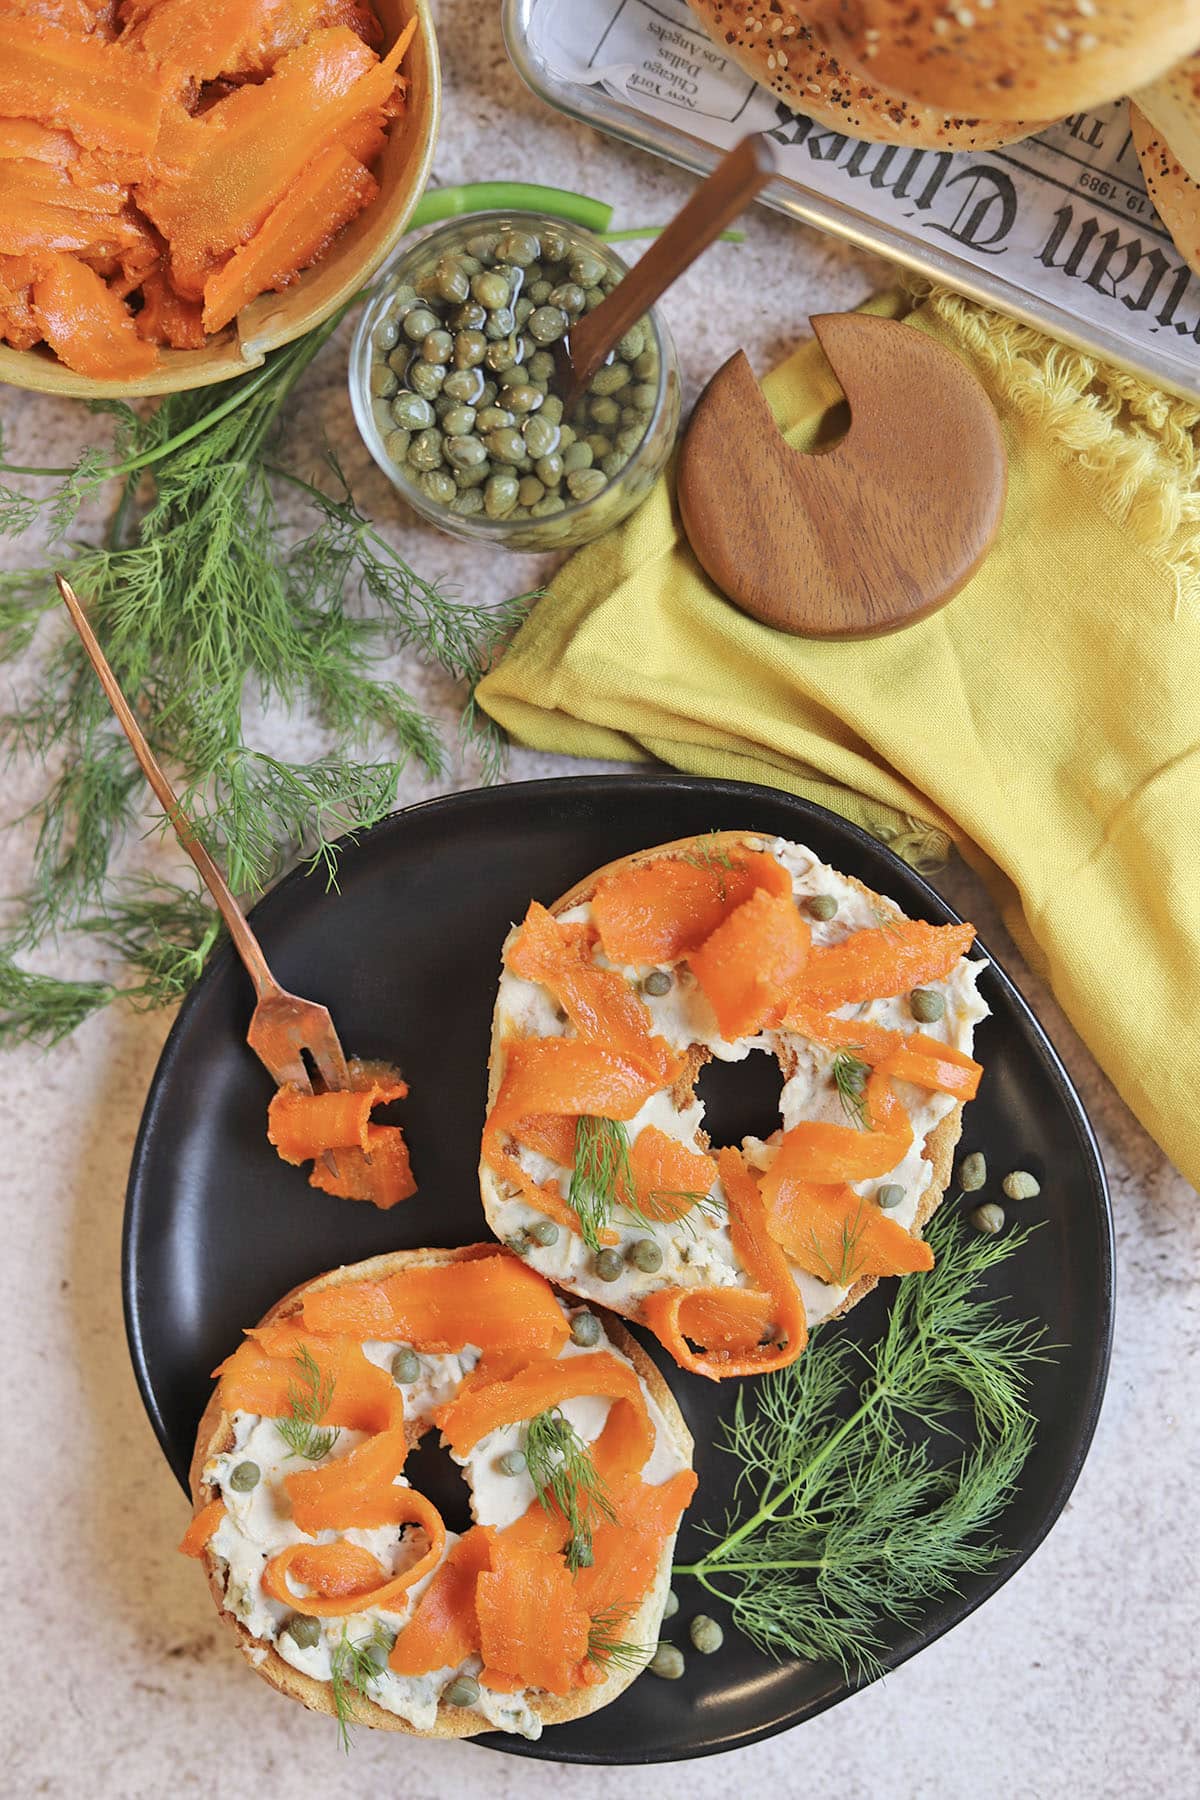 Bagels with vegan cream cheese and carrot lox on plate by yellow napkin.